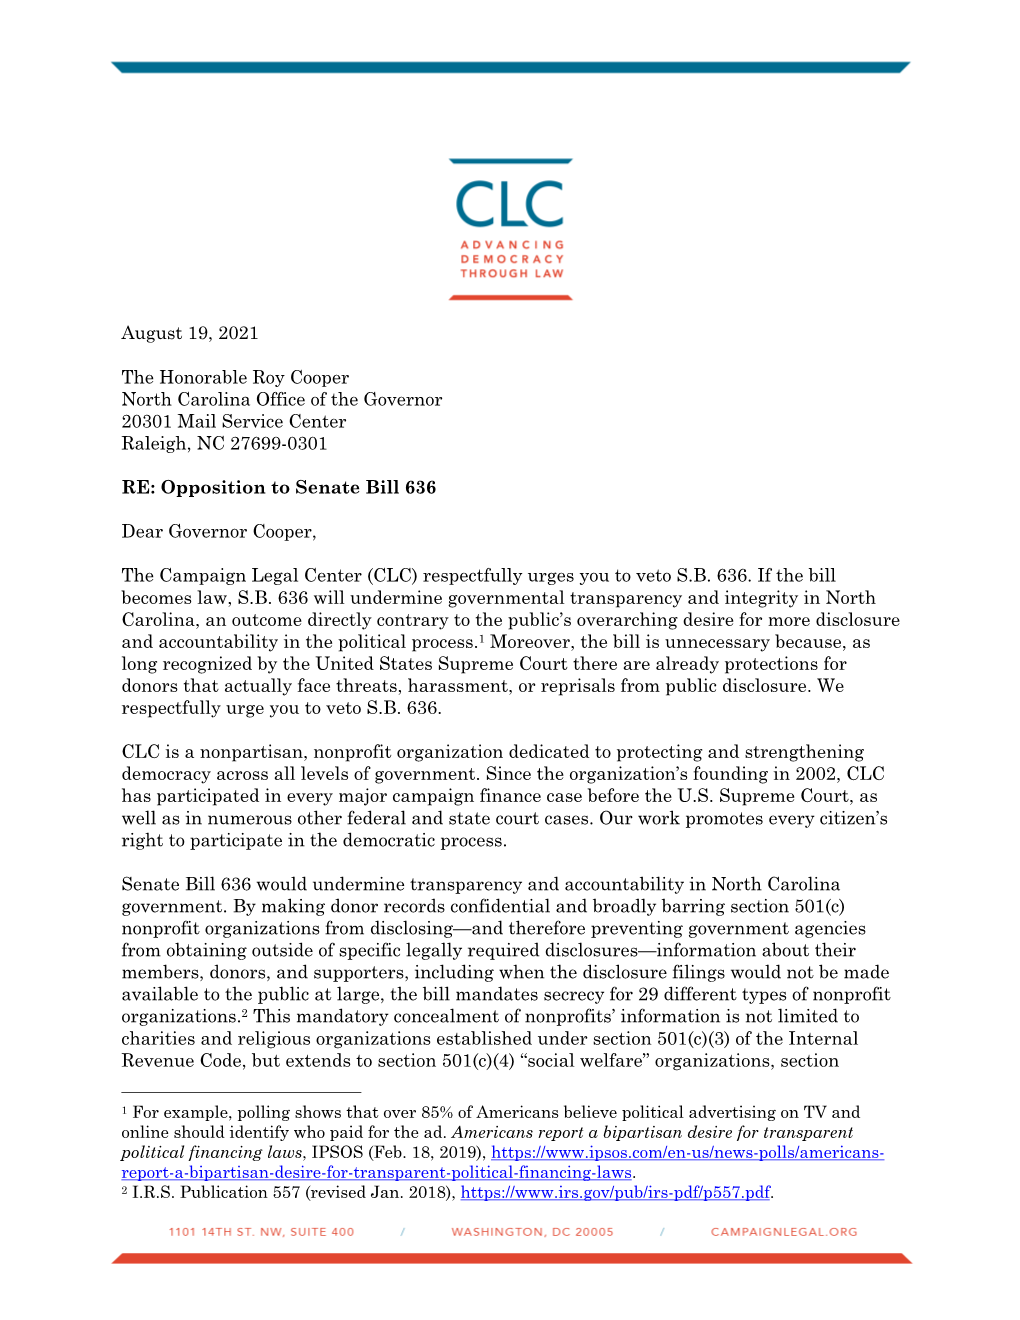 CLC Letter Supporting Veto of SB